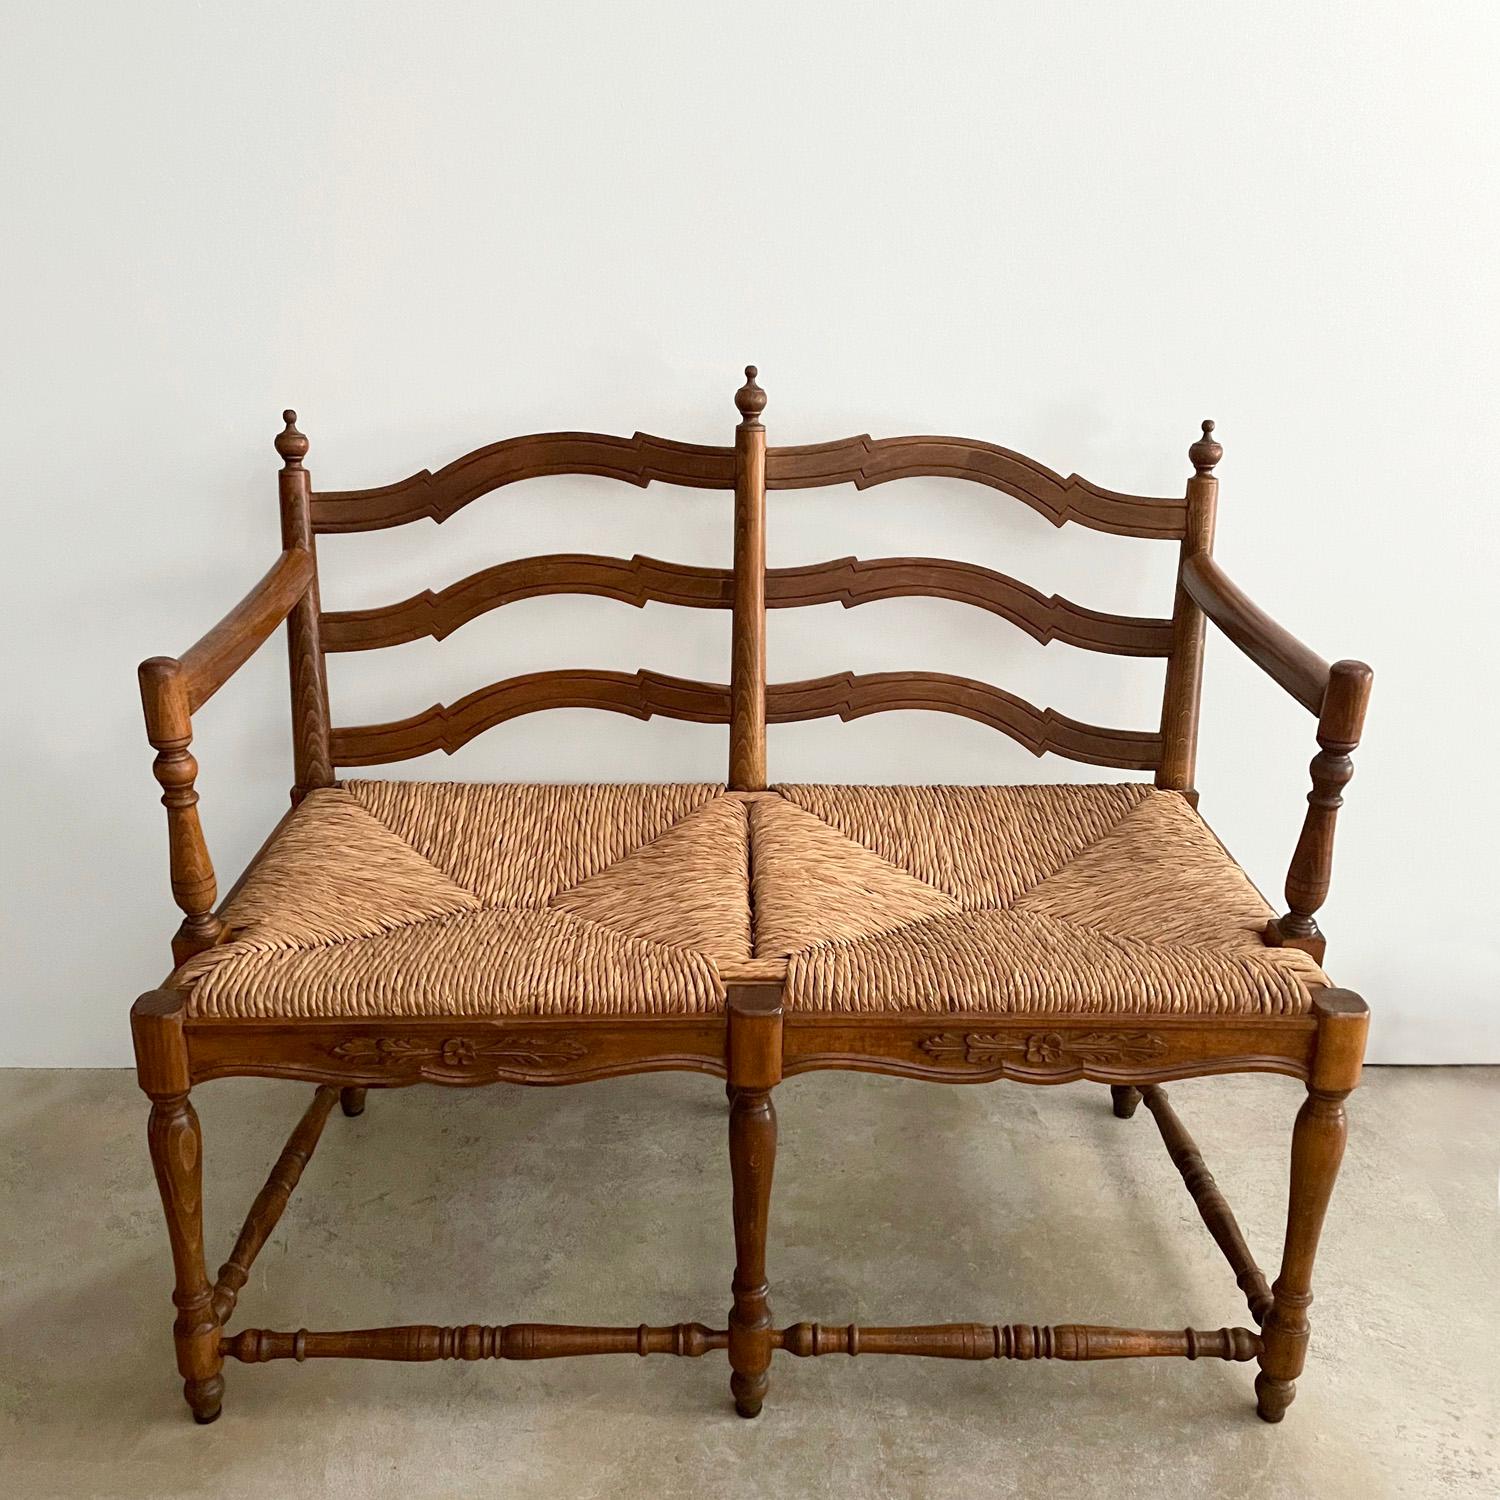 Antique rustic wood settee bench
Darling woven rush two-seater settee bench 
Wonderful attention to details throughout 
Solid wood frame has carved wood detailing and is finished with delicate turned wood finials
Seat base has carved floral motif